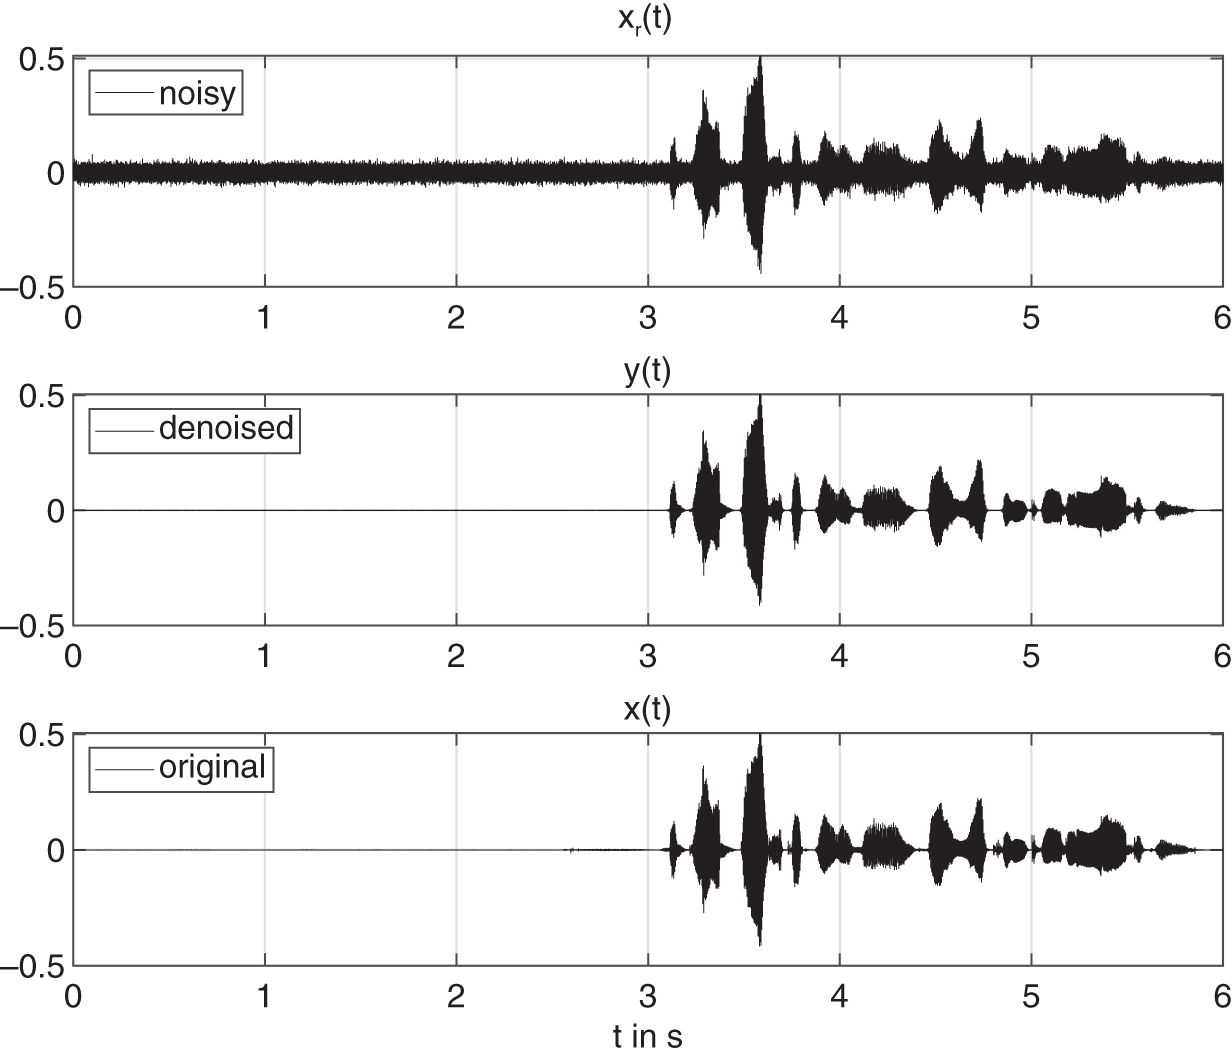 Schematic illustration of example of noise suppression in an audio file from the PTDB-TUG speech dataset.